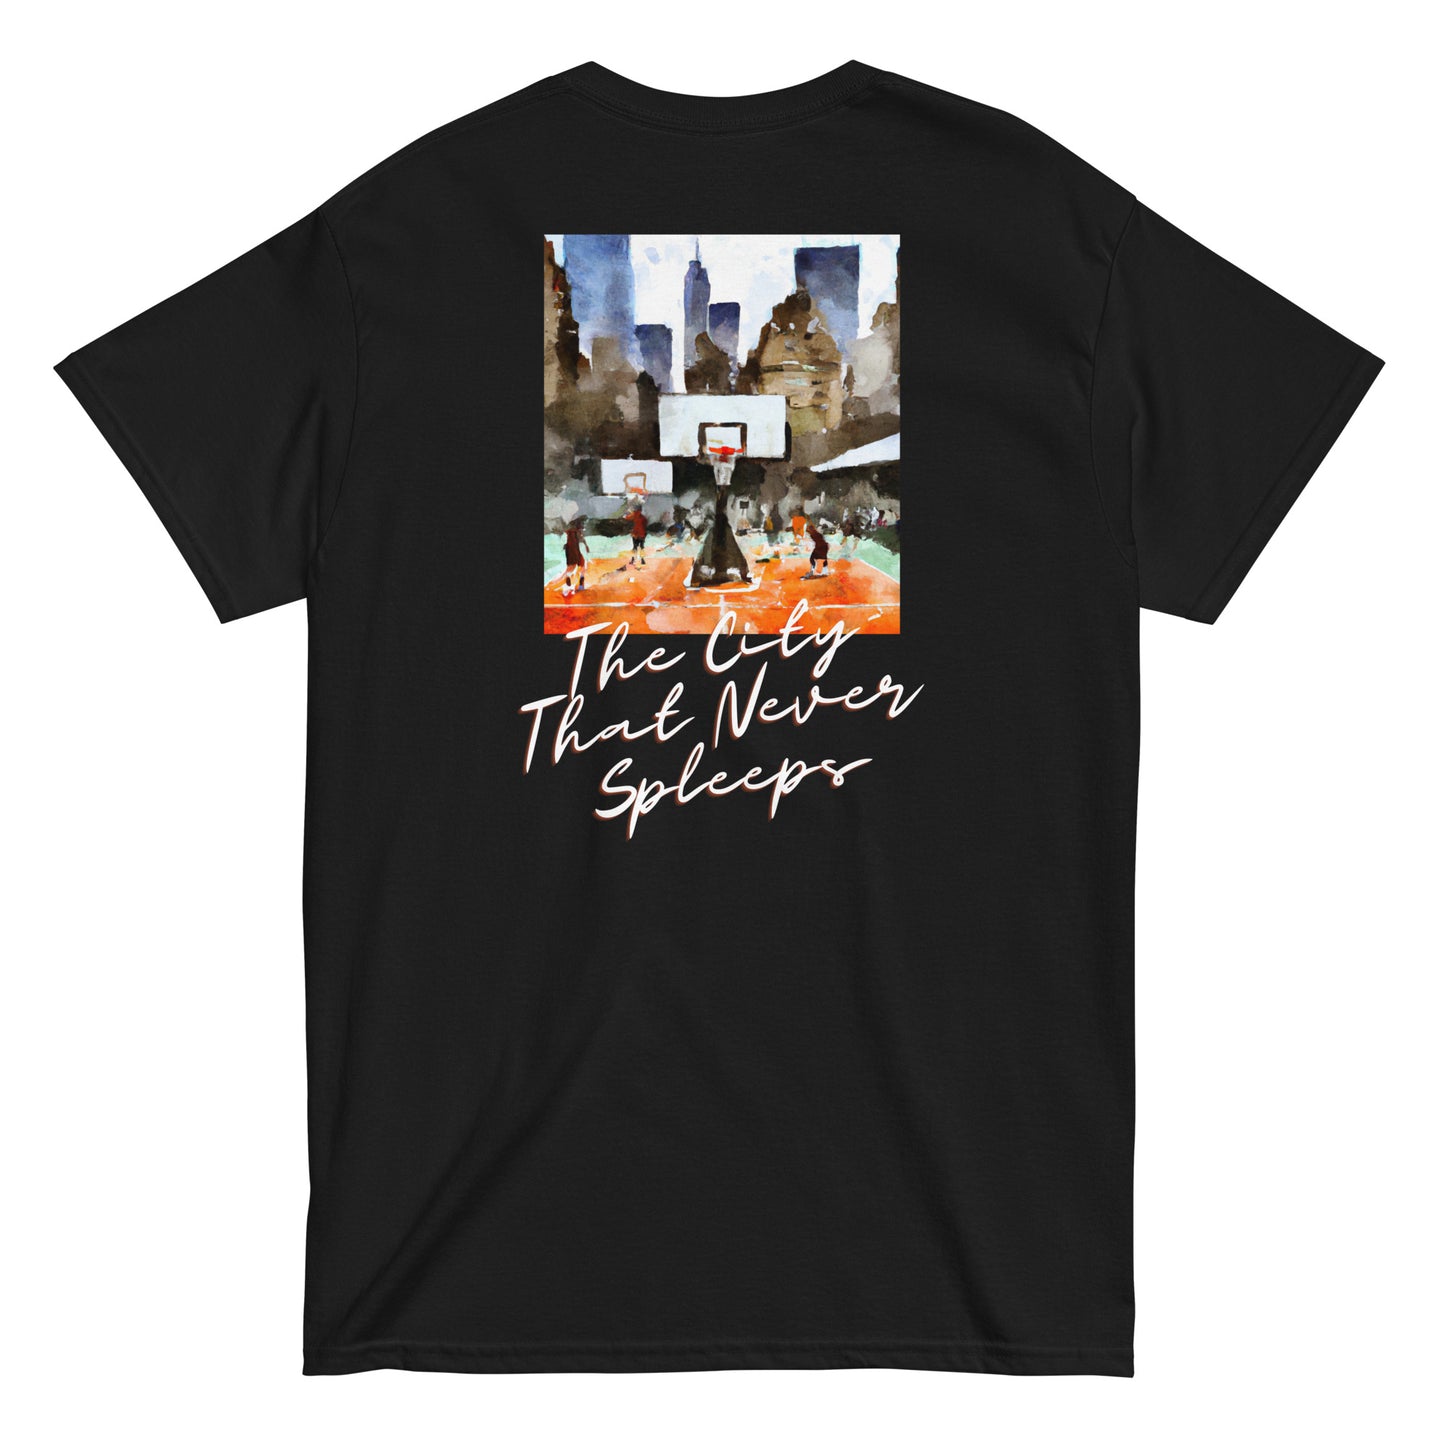 “The City That Never Sleeps” Embroidered T-shirt - Black